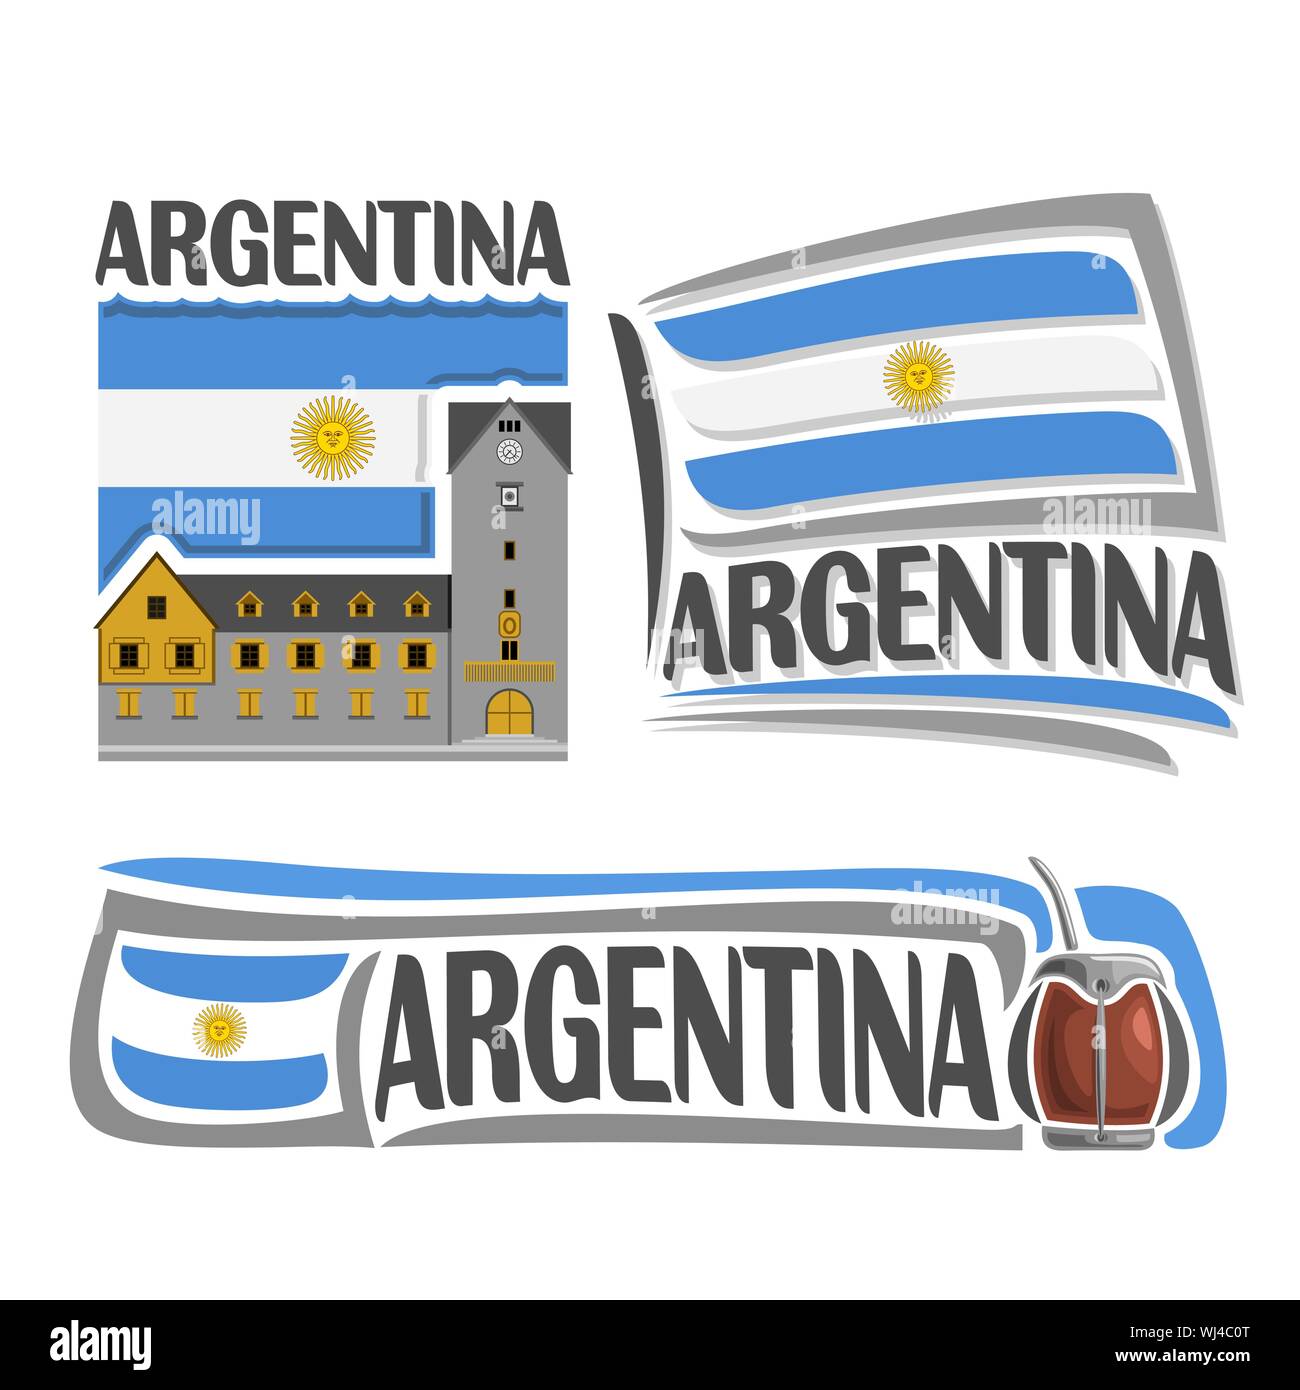 Vector logo for Argentina, 3 isolated illustrations: Bariloche on background of national state flag, symbol Argentina architecture, argentinean flag o Stock Vector